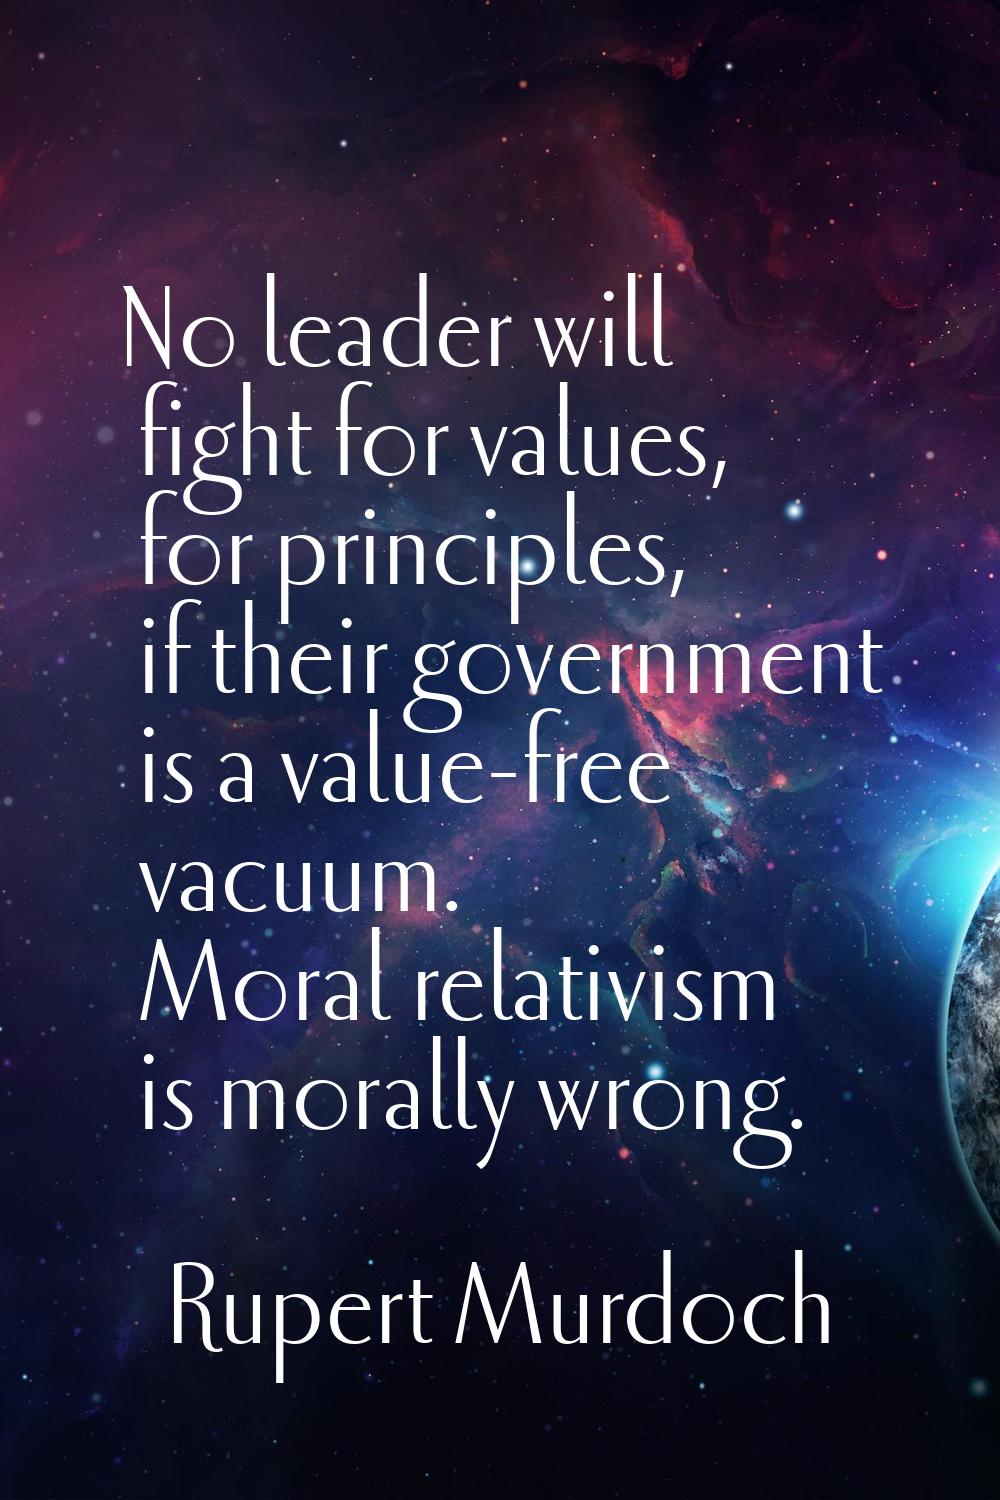 No leader will fight for values, for principles, if their government is a value-free vacuum. Moral 